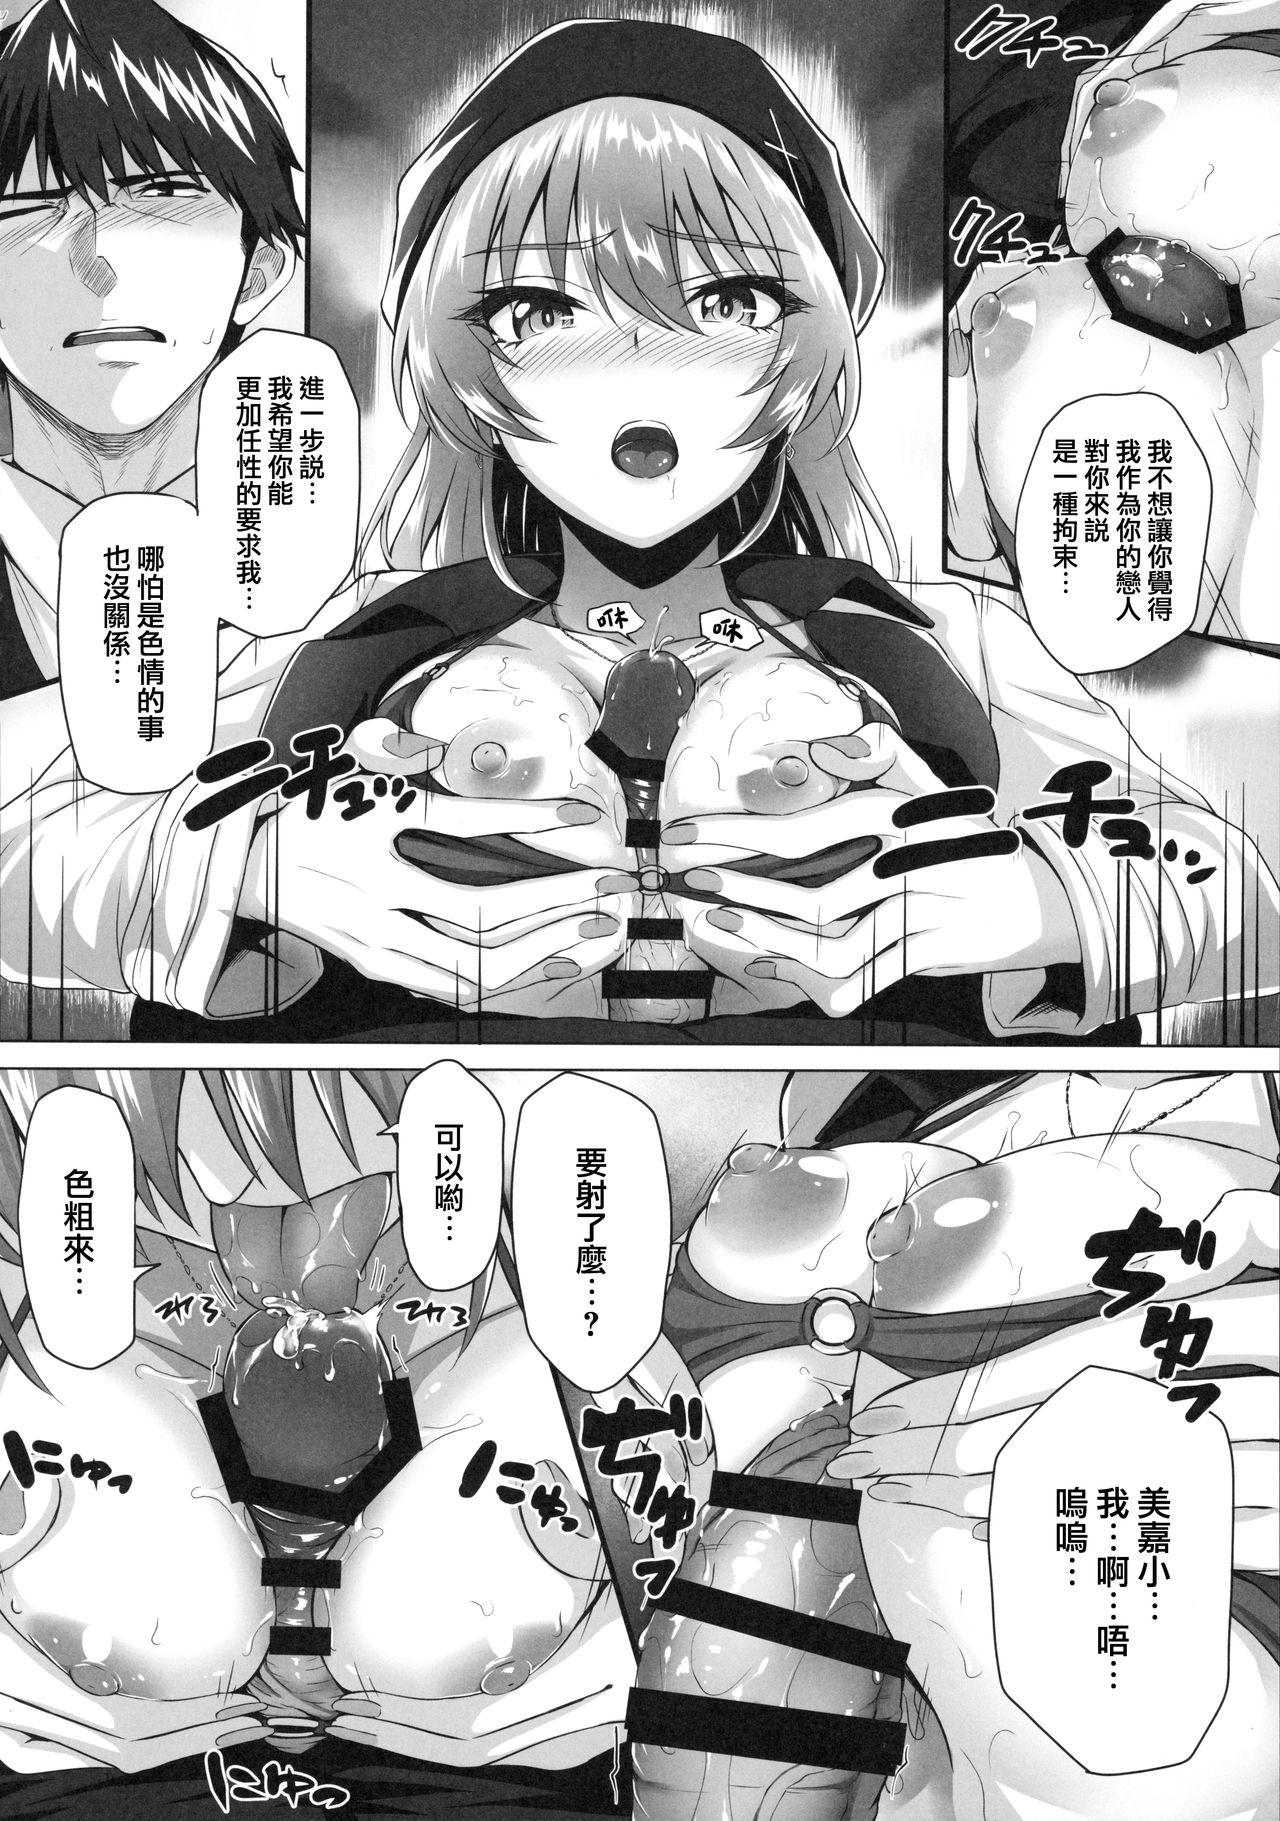 Big Dick Mika and P Plus - The idolmaster Piercing - Page 12